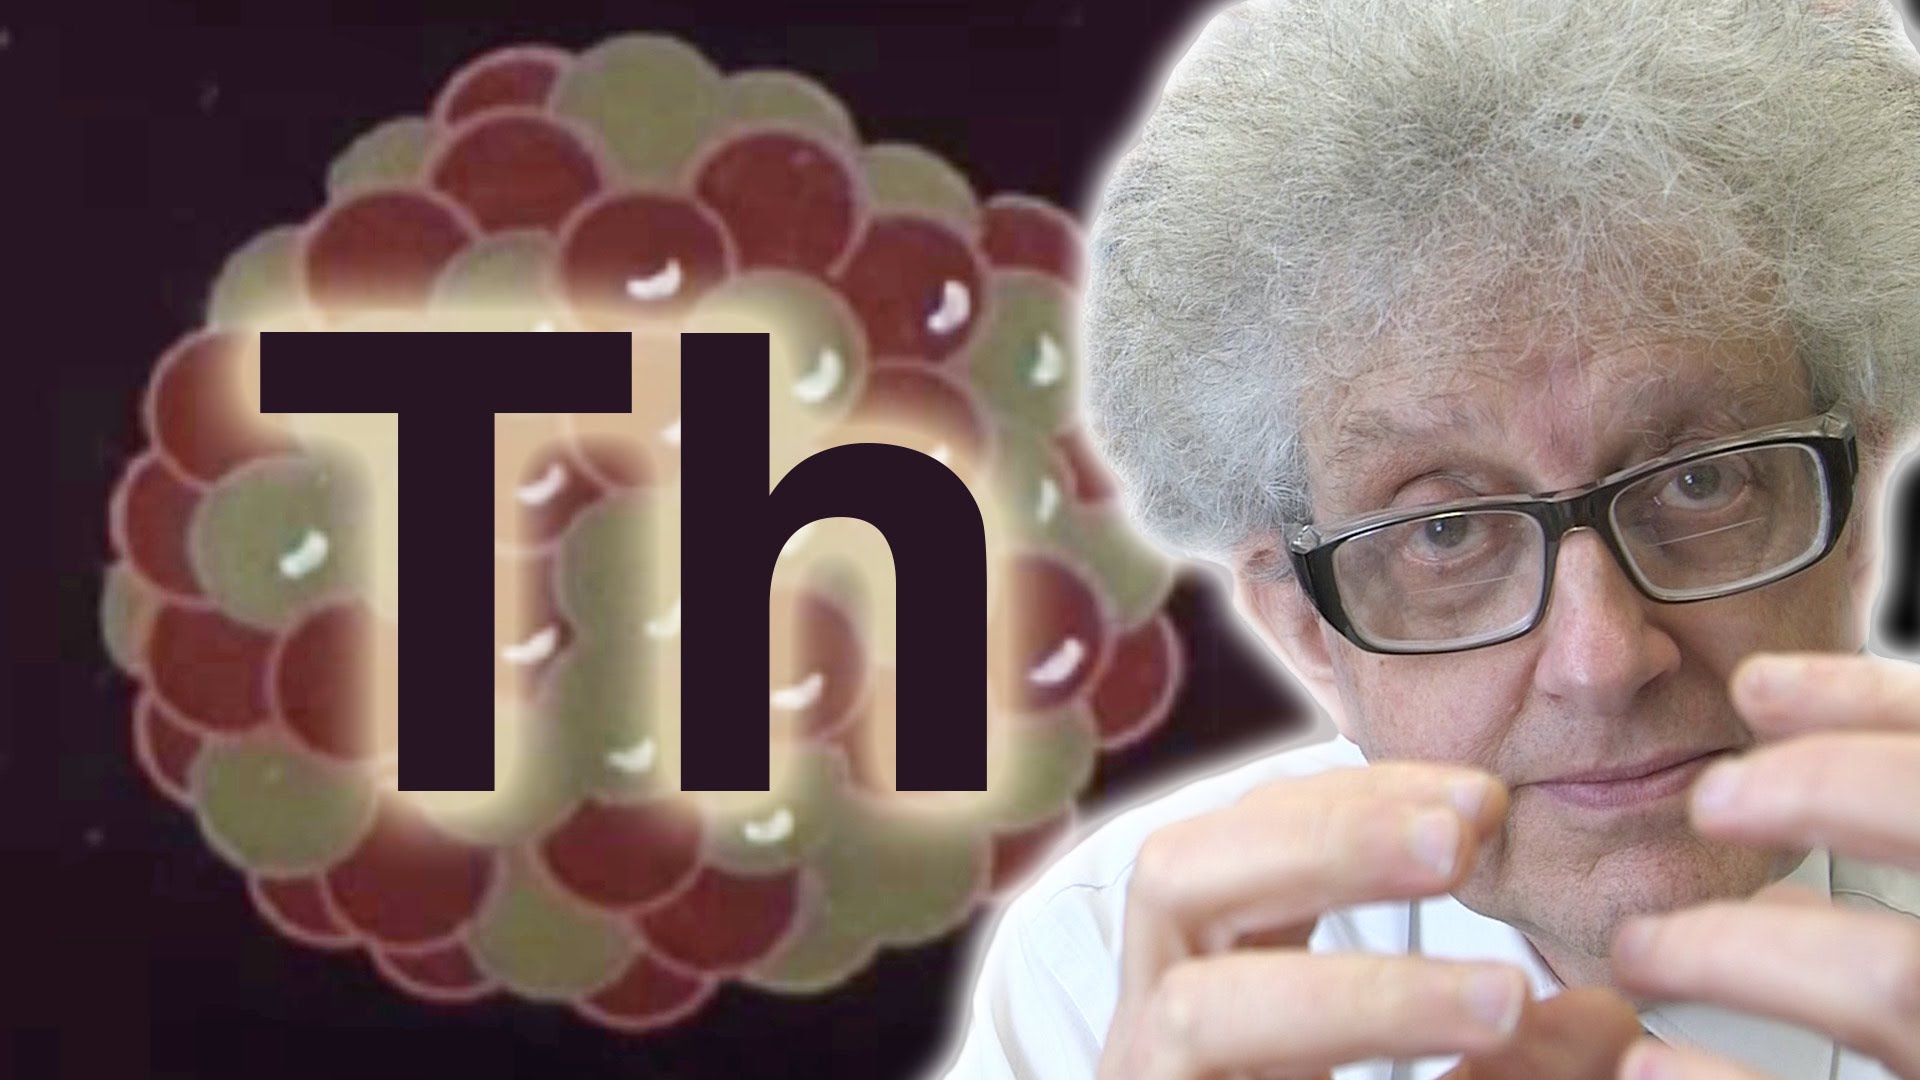 Thorium and why we don't use it for nuclear power